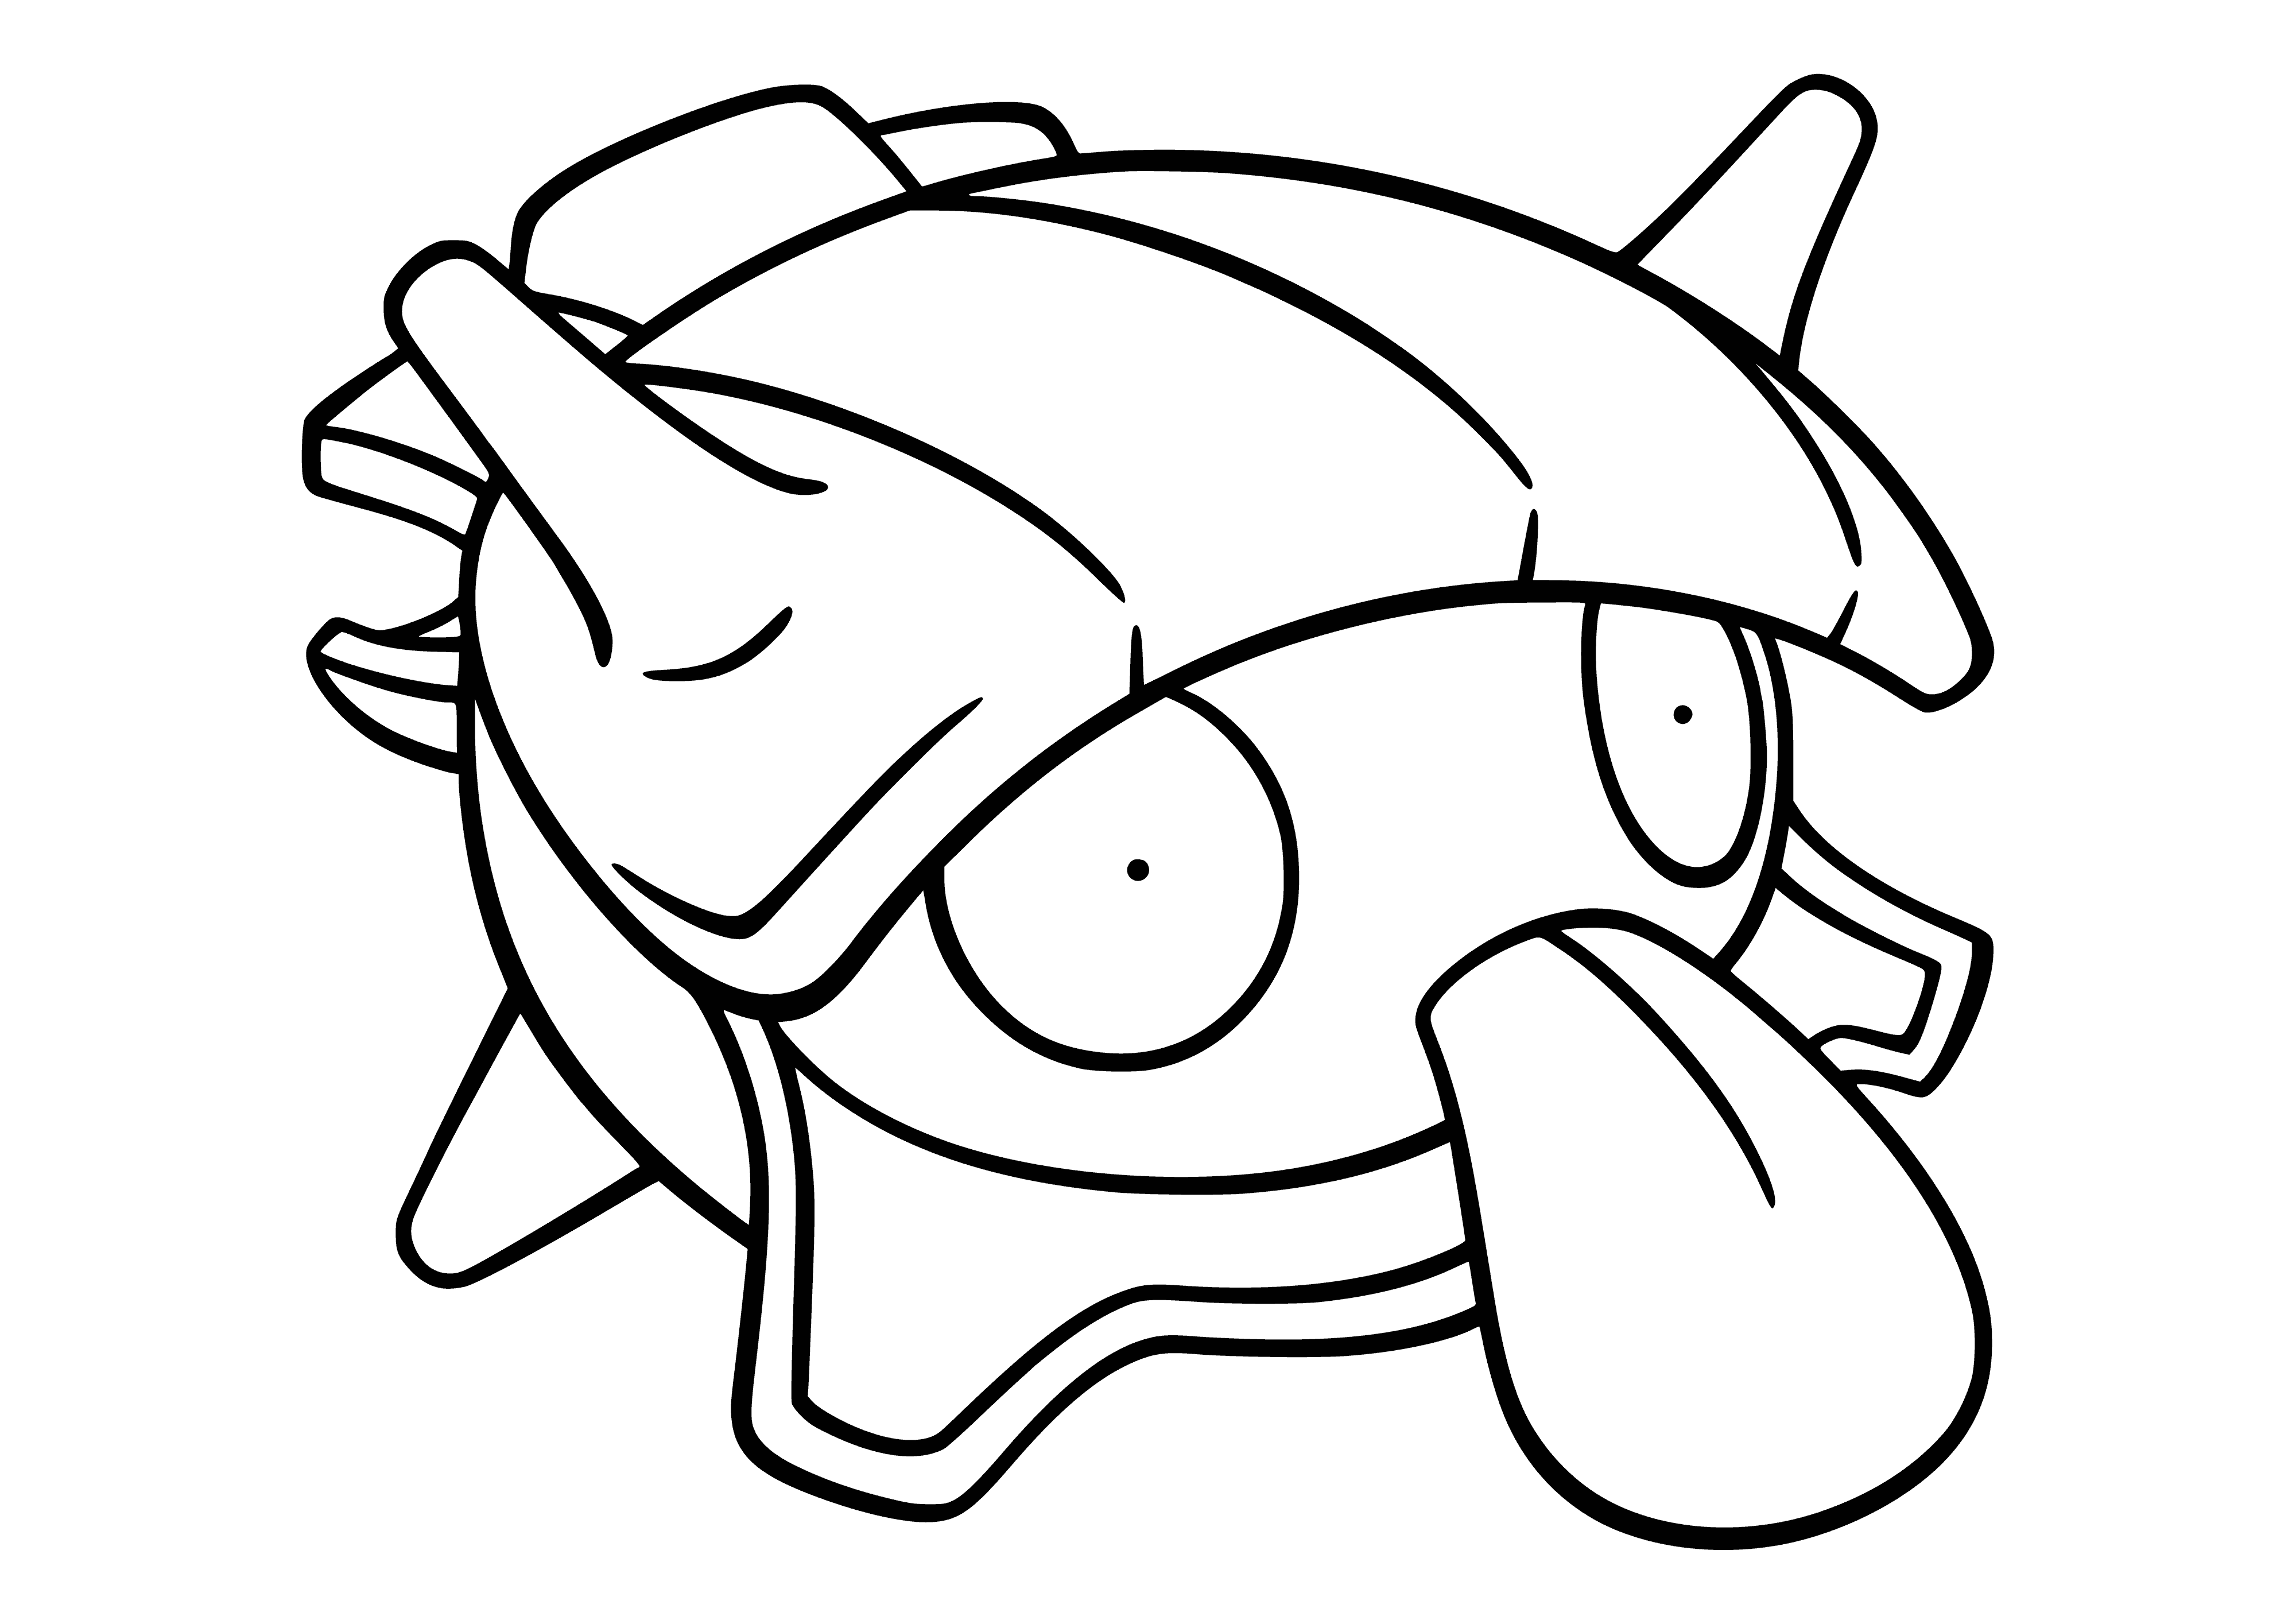 coloring page: This bivalve Pokémon has a hard shell with spikes and a pink tongue inside. It can be identified by two black eyes on either side of its head.